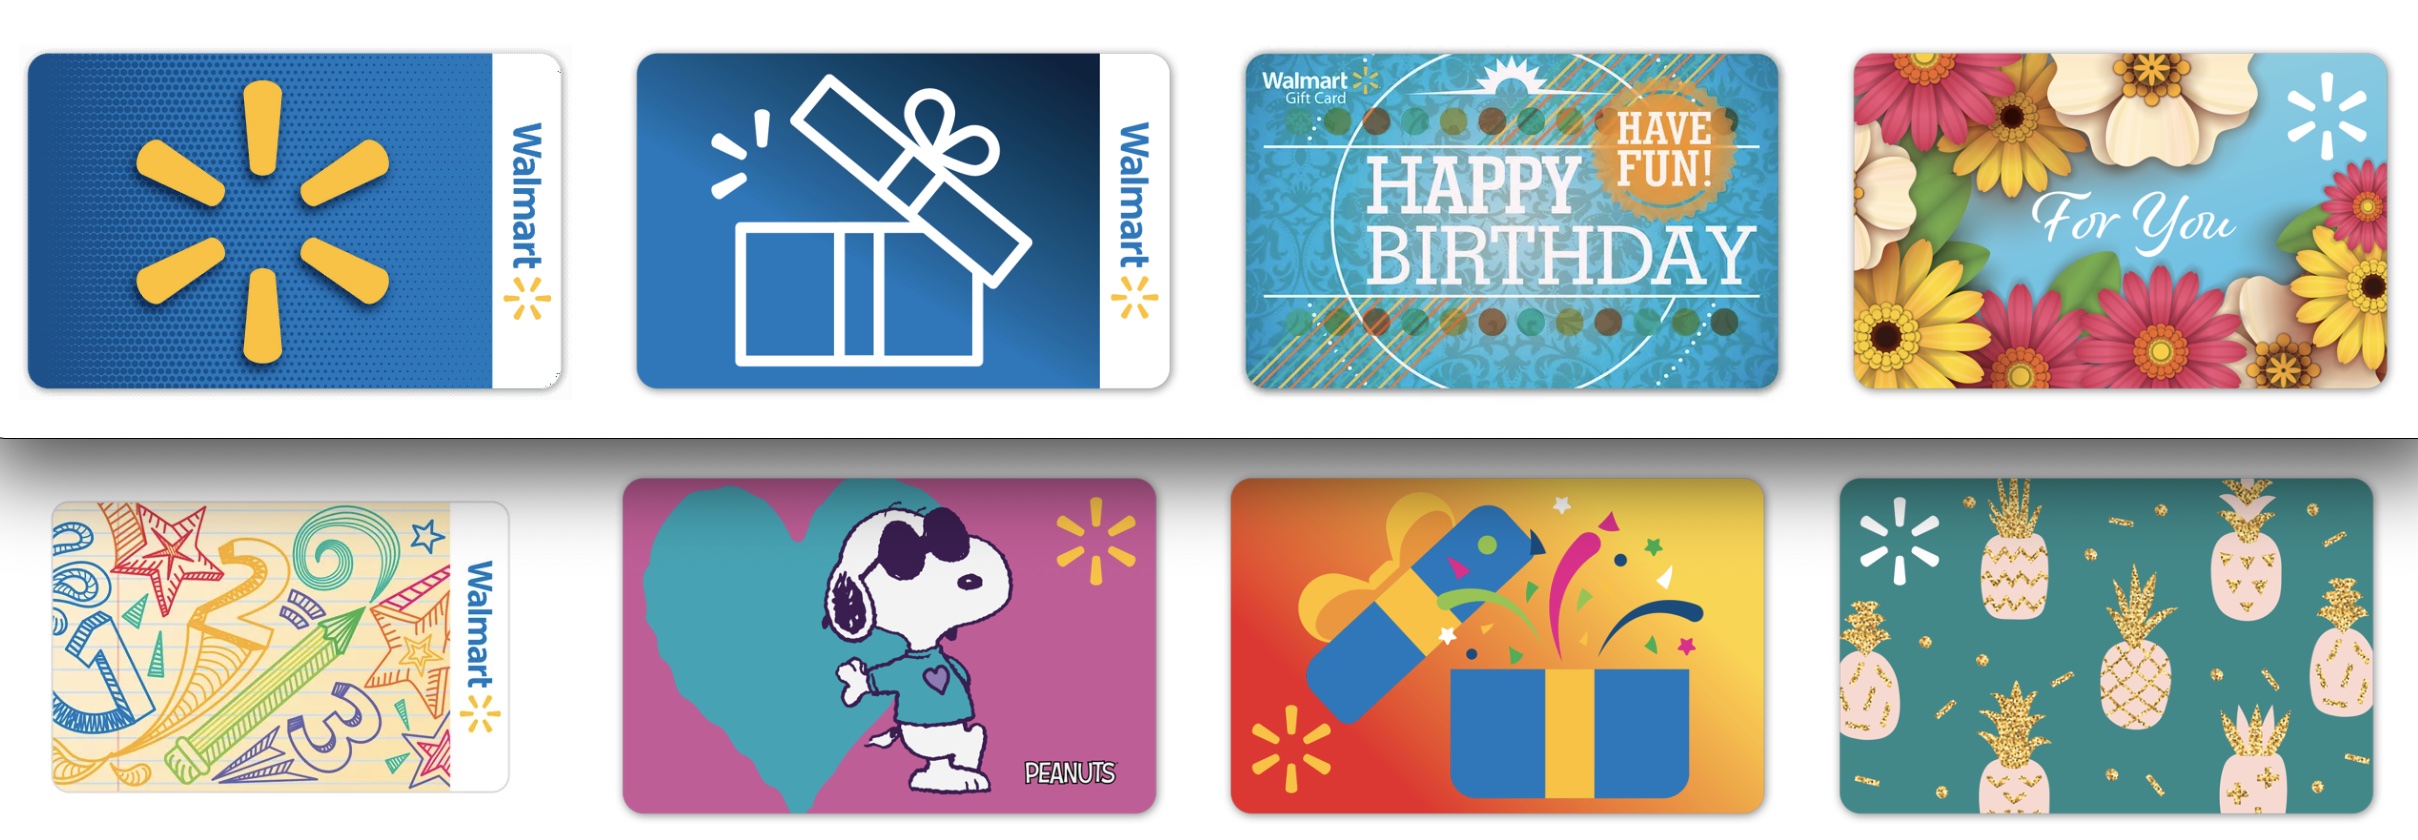 Can You Buy Gift Cards With Walmart Gift Card?